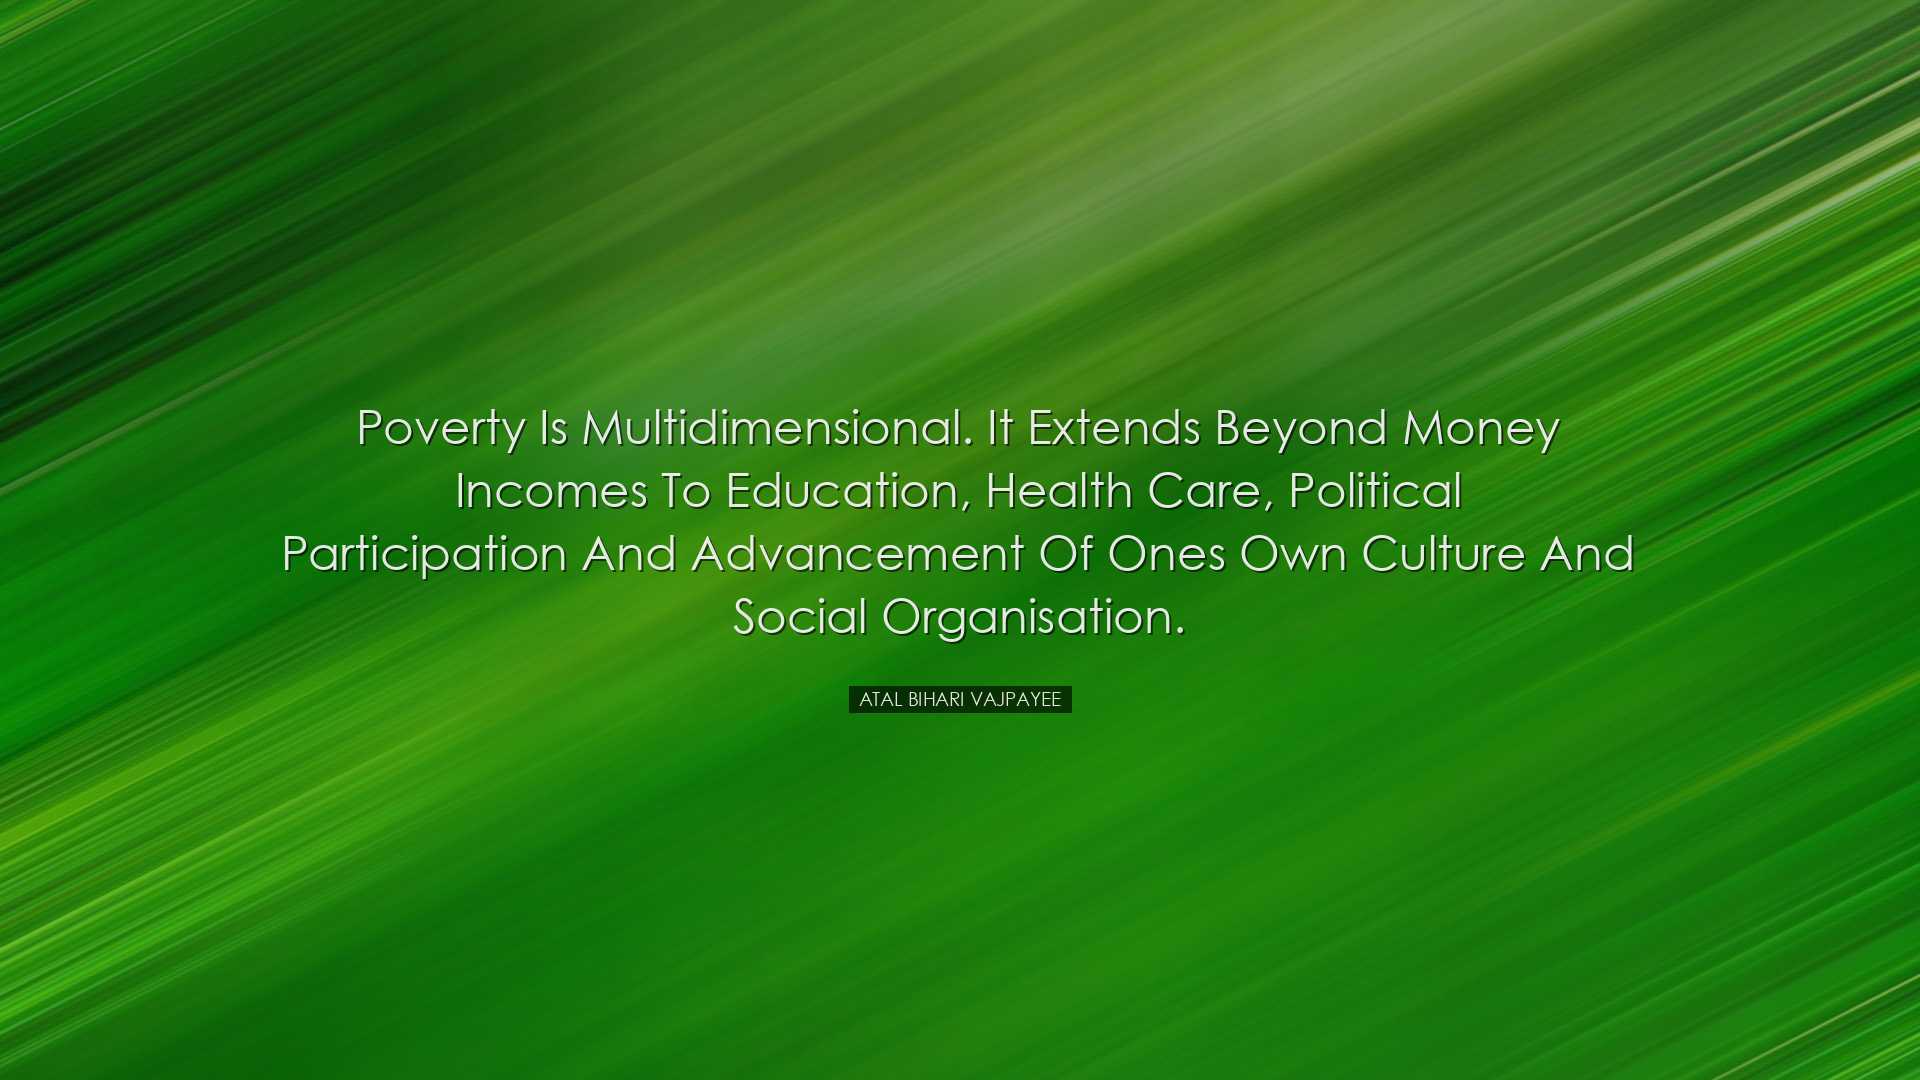 Poverty is multidimensional. It extends beyond money incomes to ed